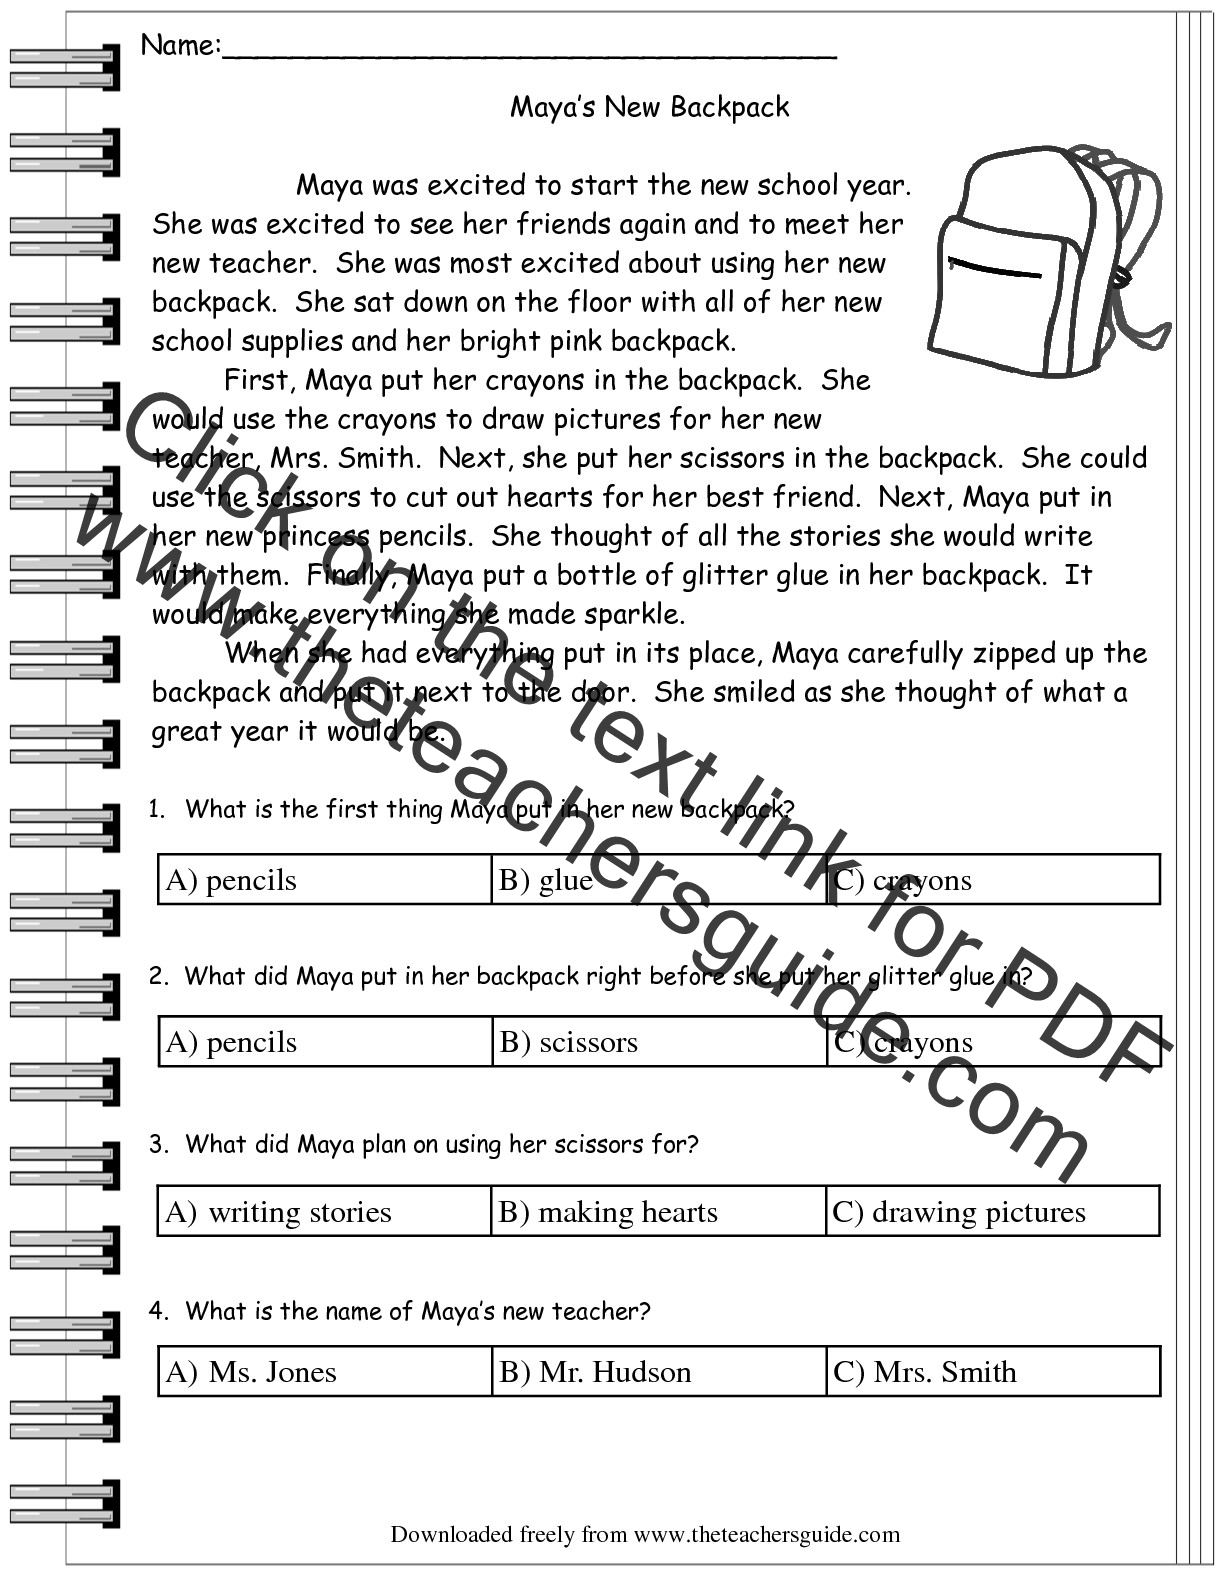 printable-reading-comprehension-worksheets-5th-grade-multiple-choice